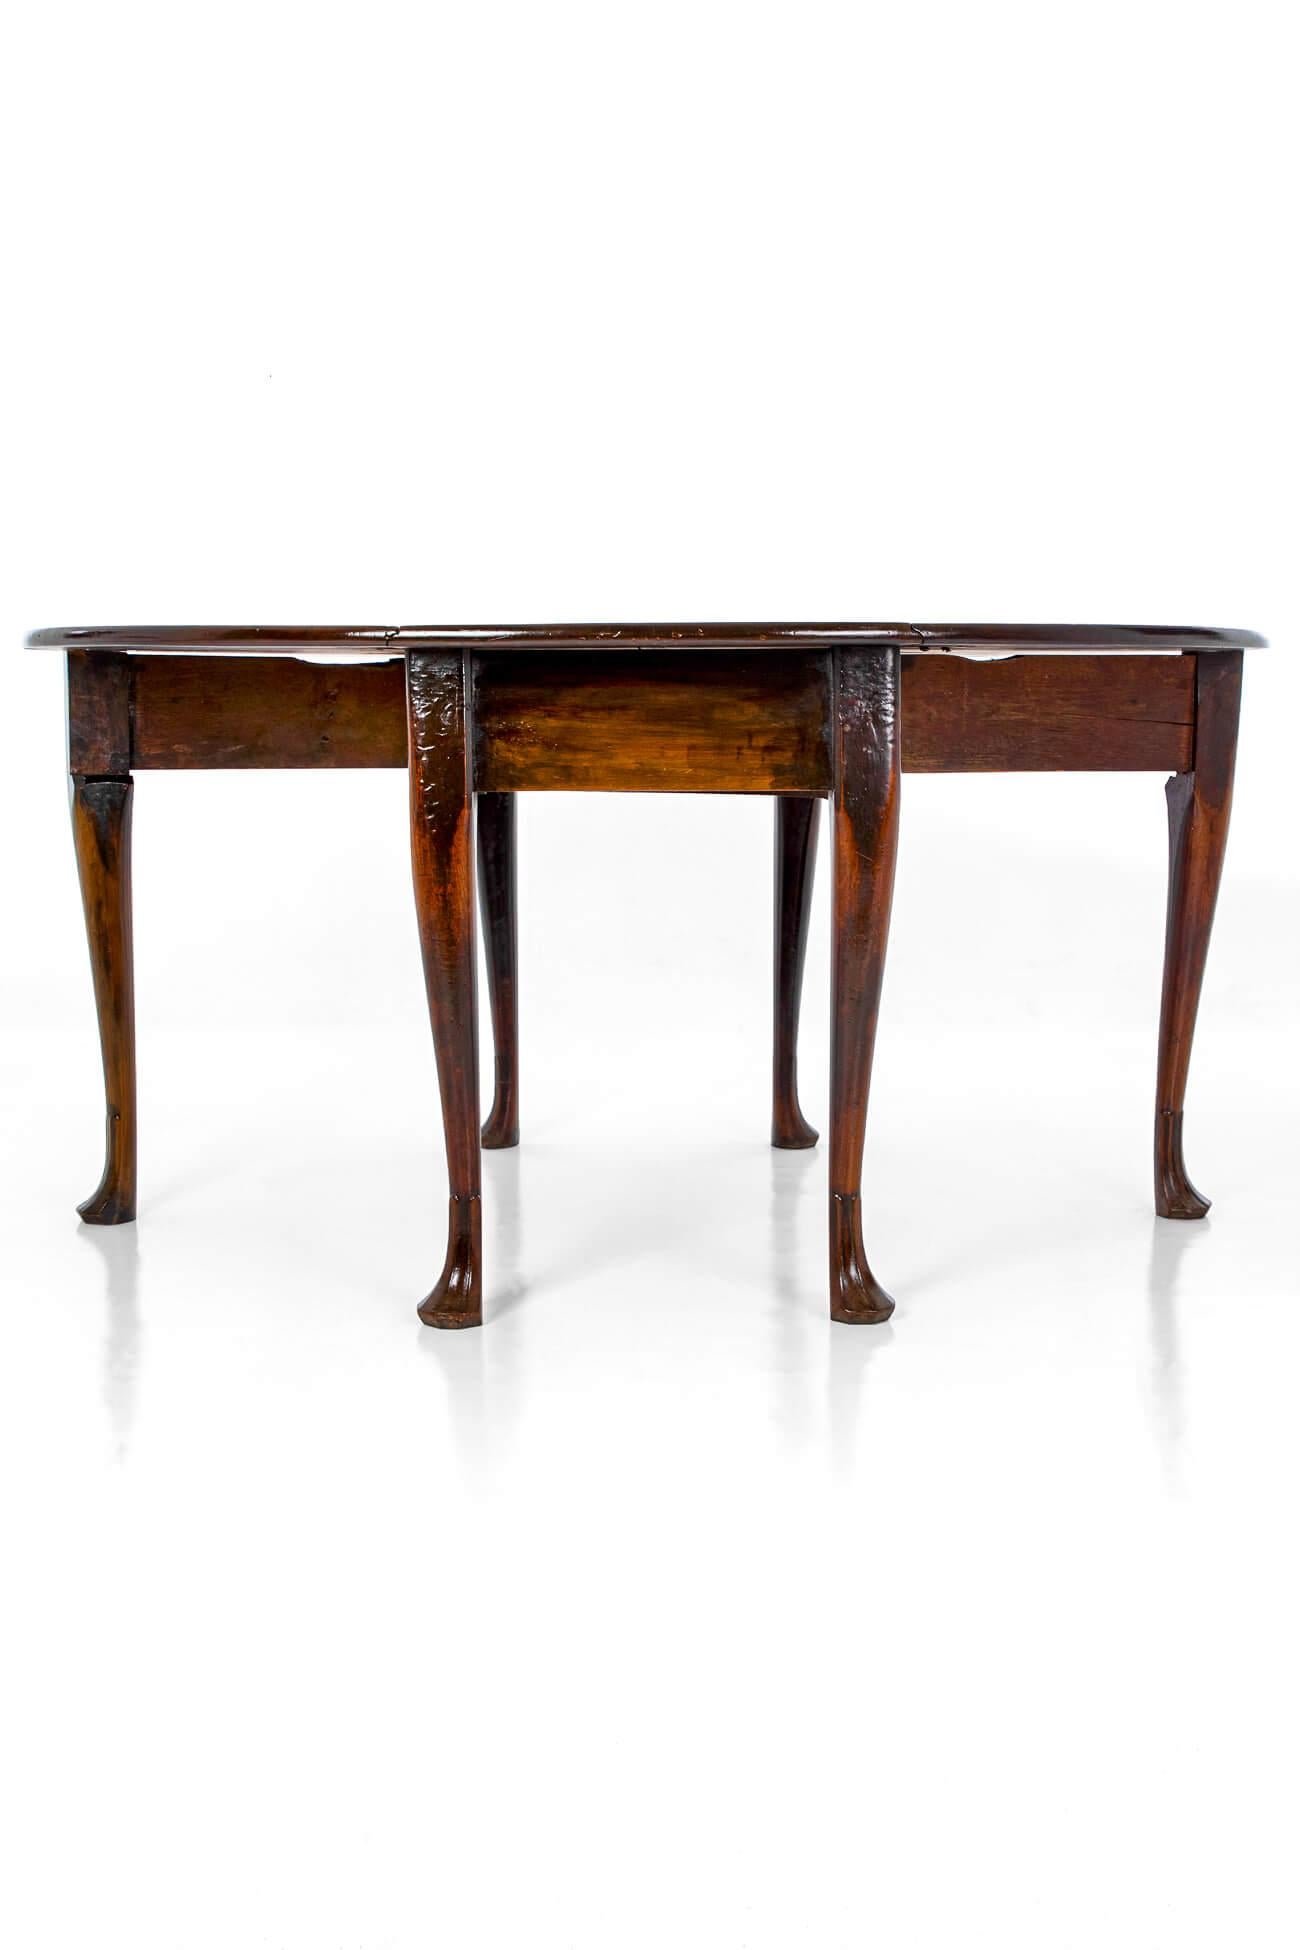 A fine George III Cuban Mahogany gate leg dining table in a remarkable state of preservation. Hinged top over two drop oval leaves raised on six cabriole legs and pad feet. 

Irish, circa 1760.

Additional information:
Table when leaves